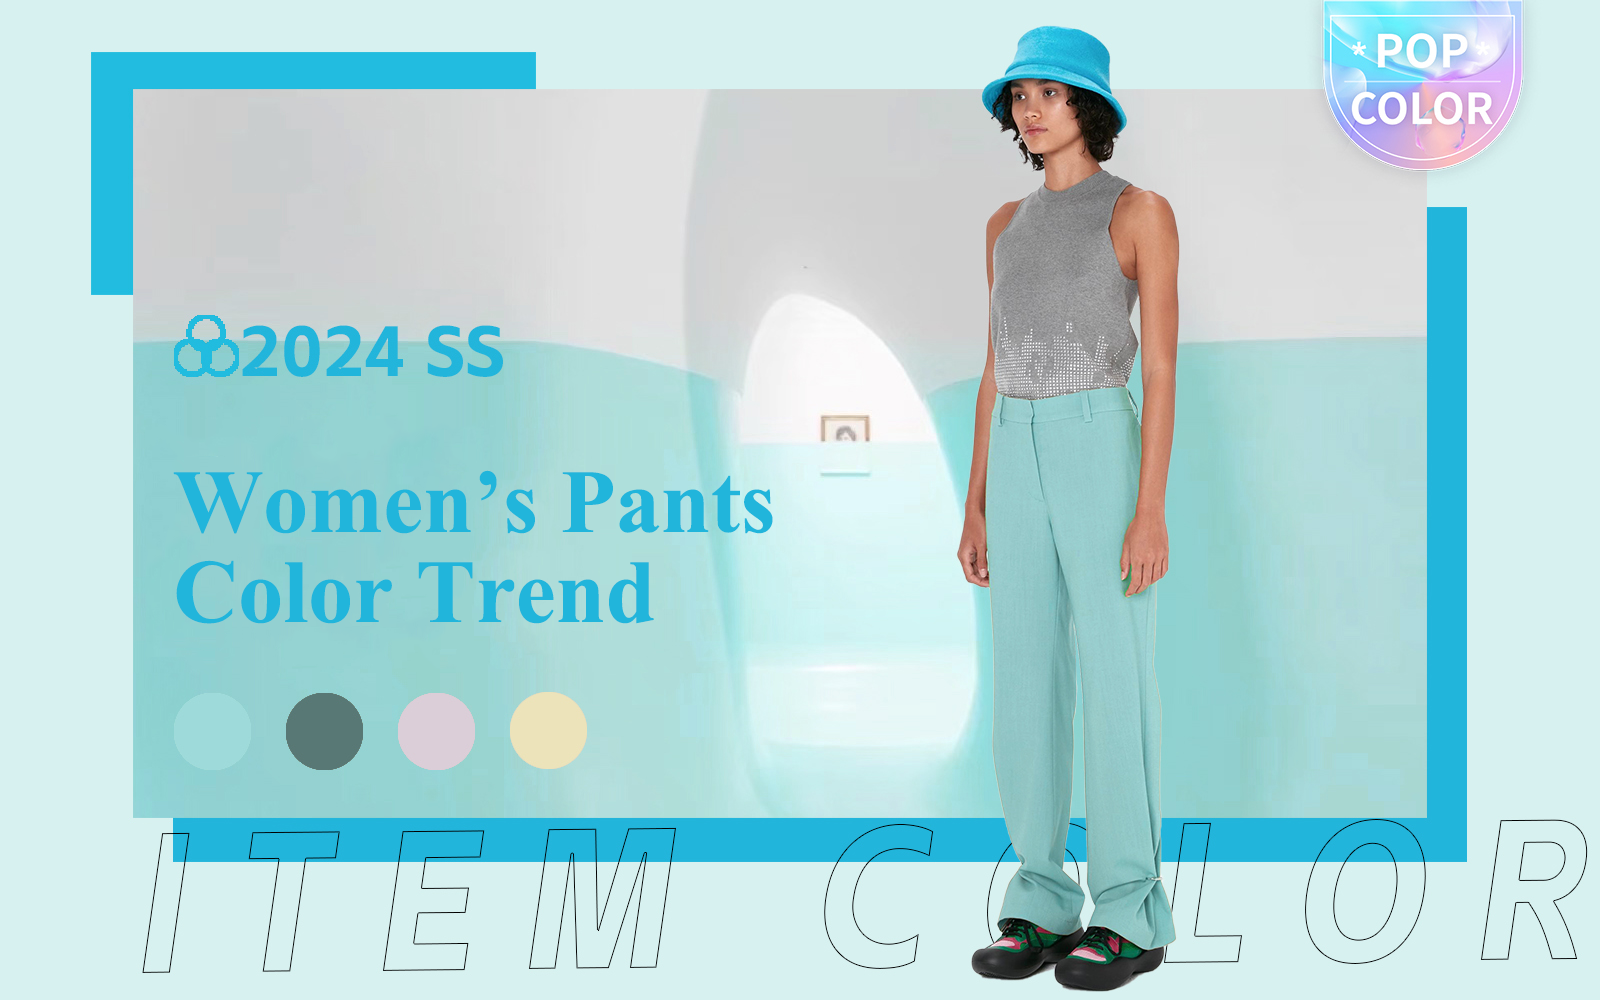 Cozy Summer -- The Color Trend for Women's Pants